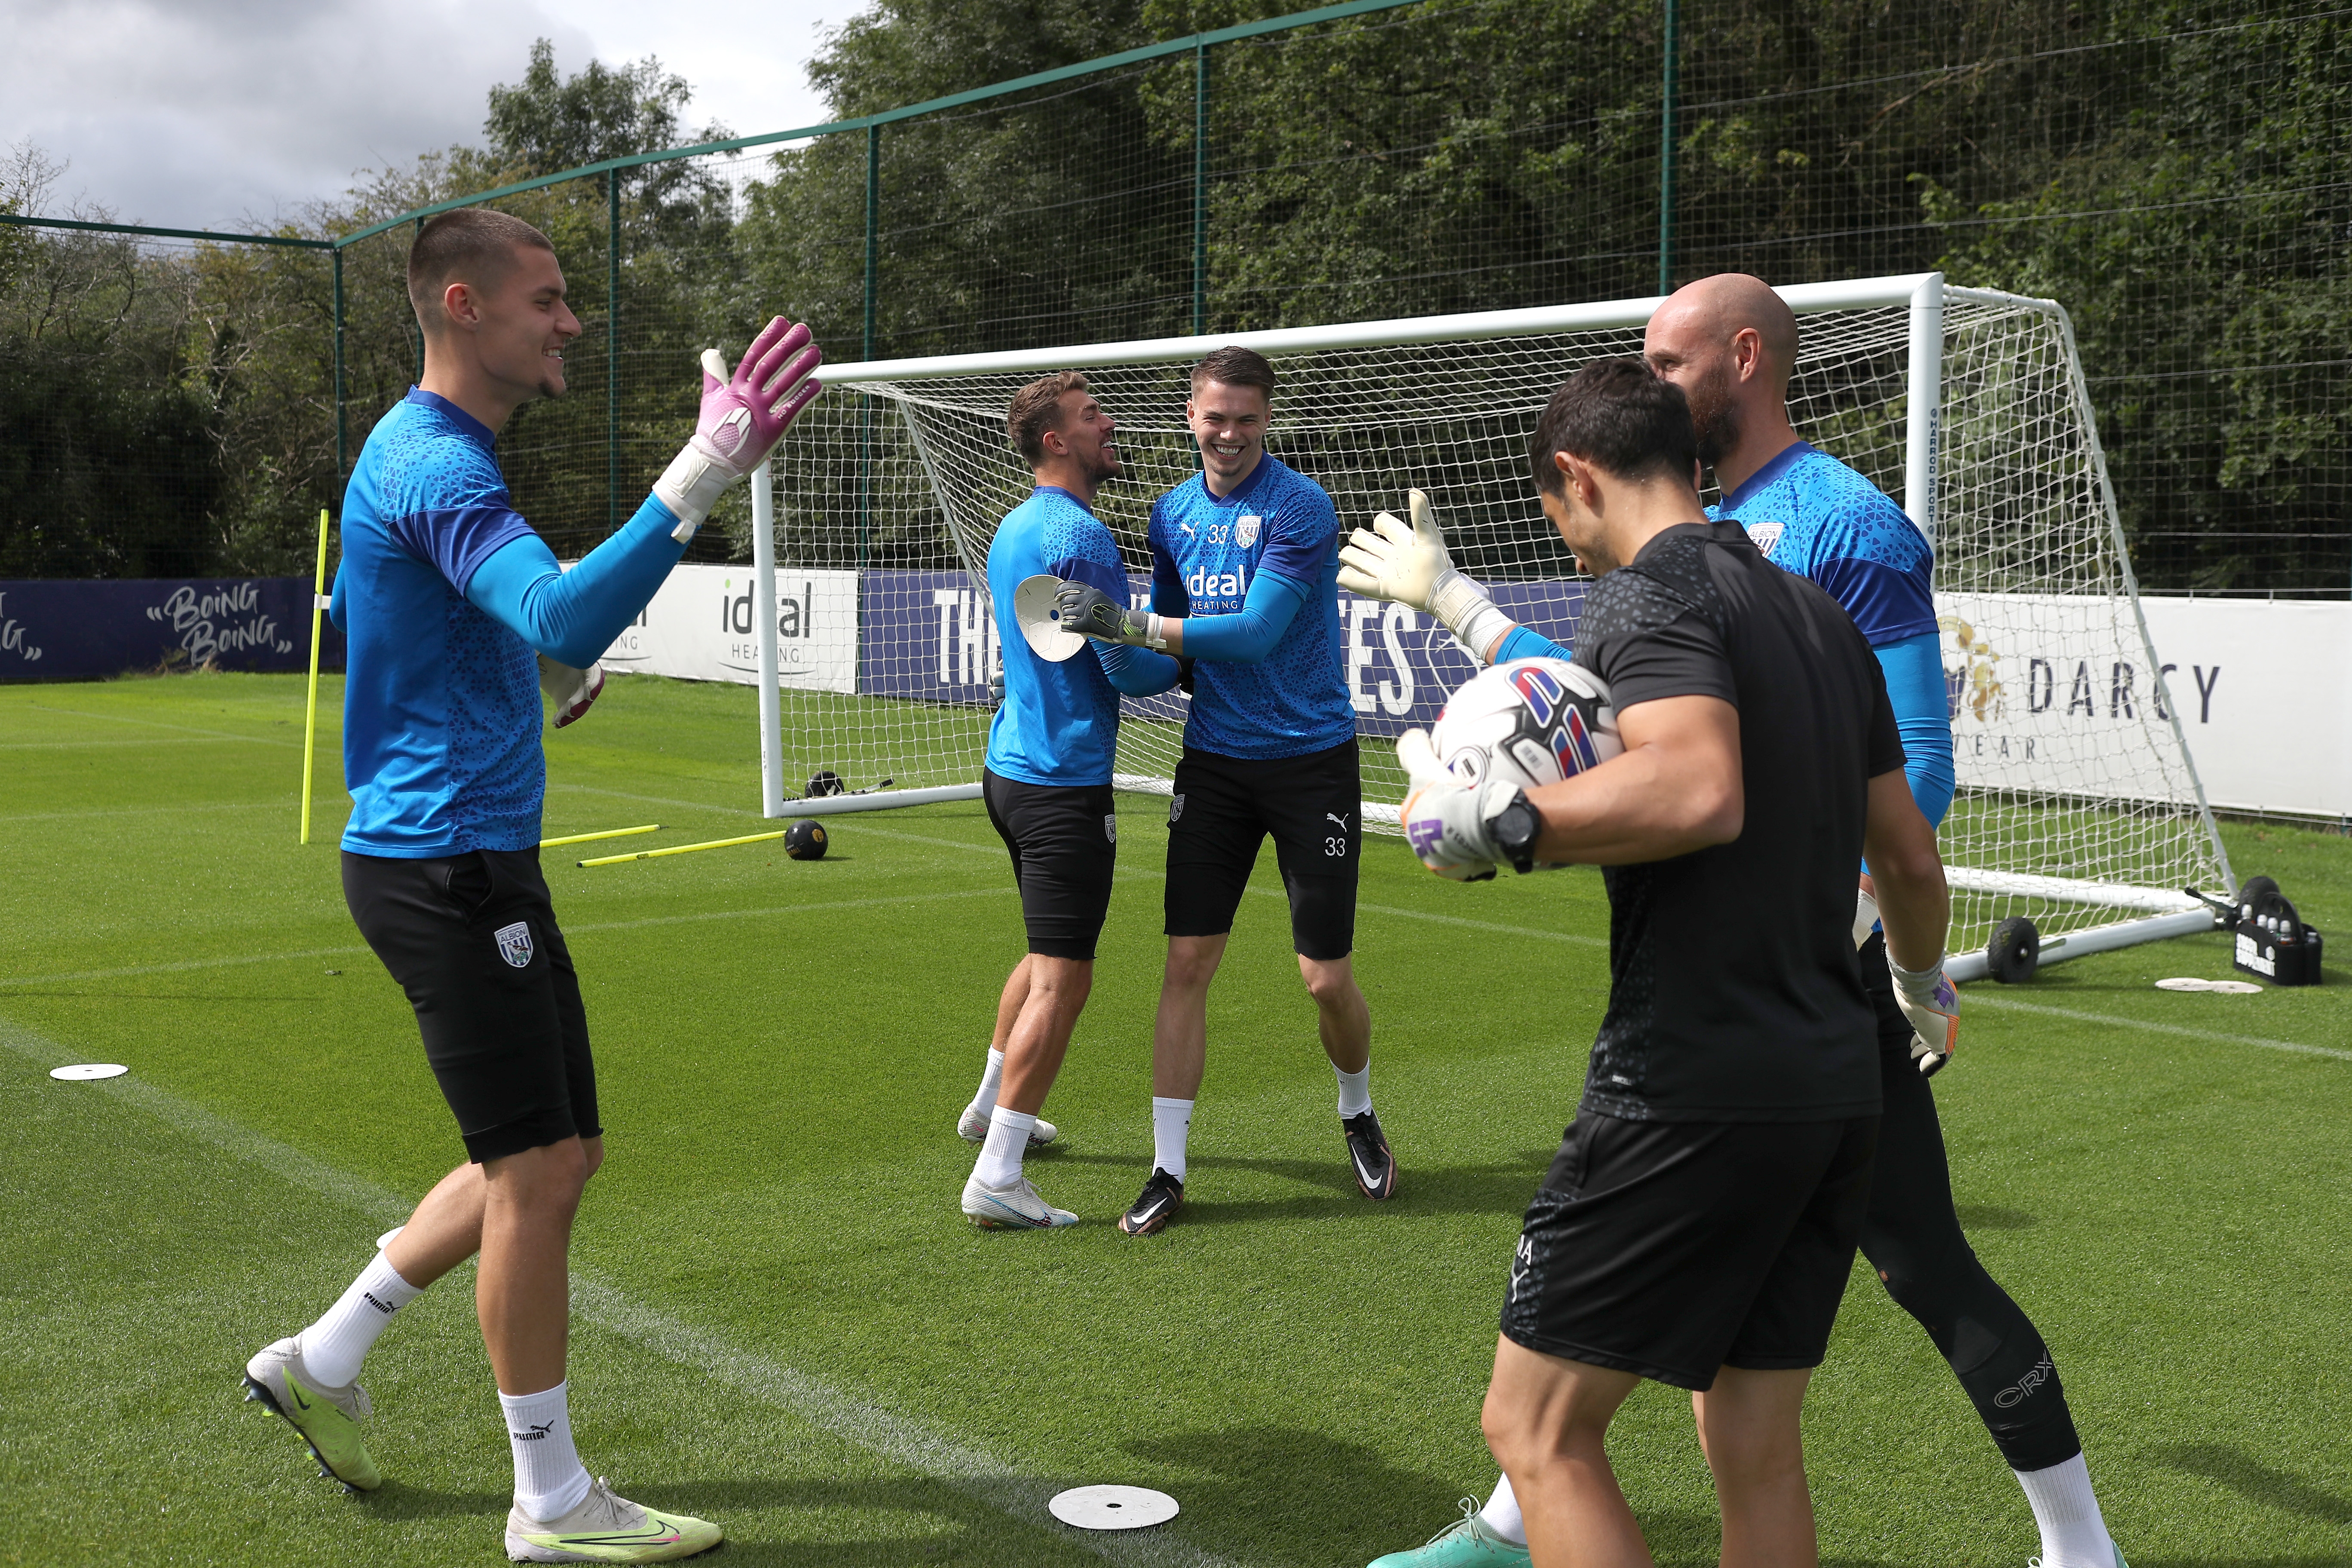 Albion goalkeepers smiling in training ahead of the Blackburn game